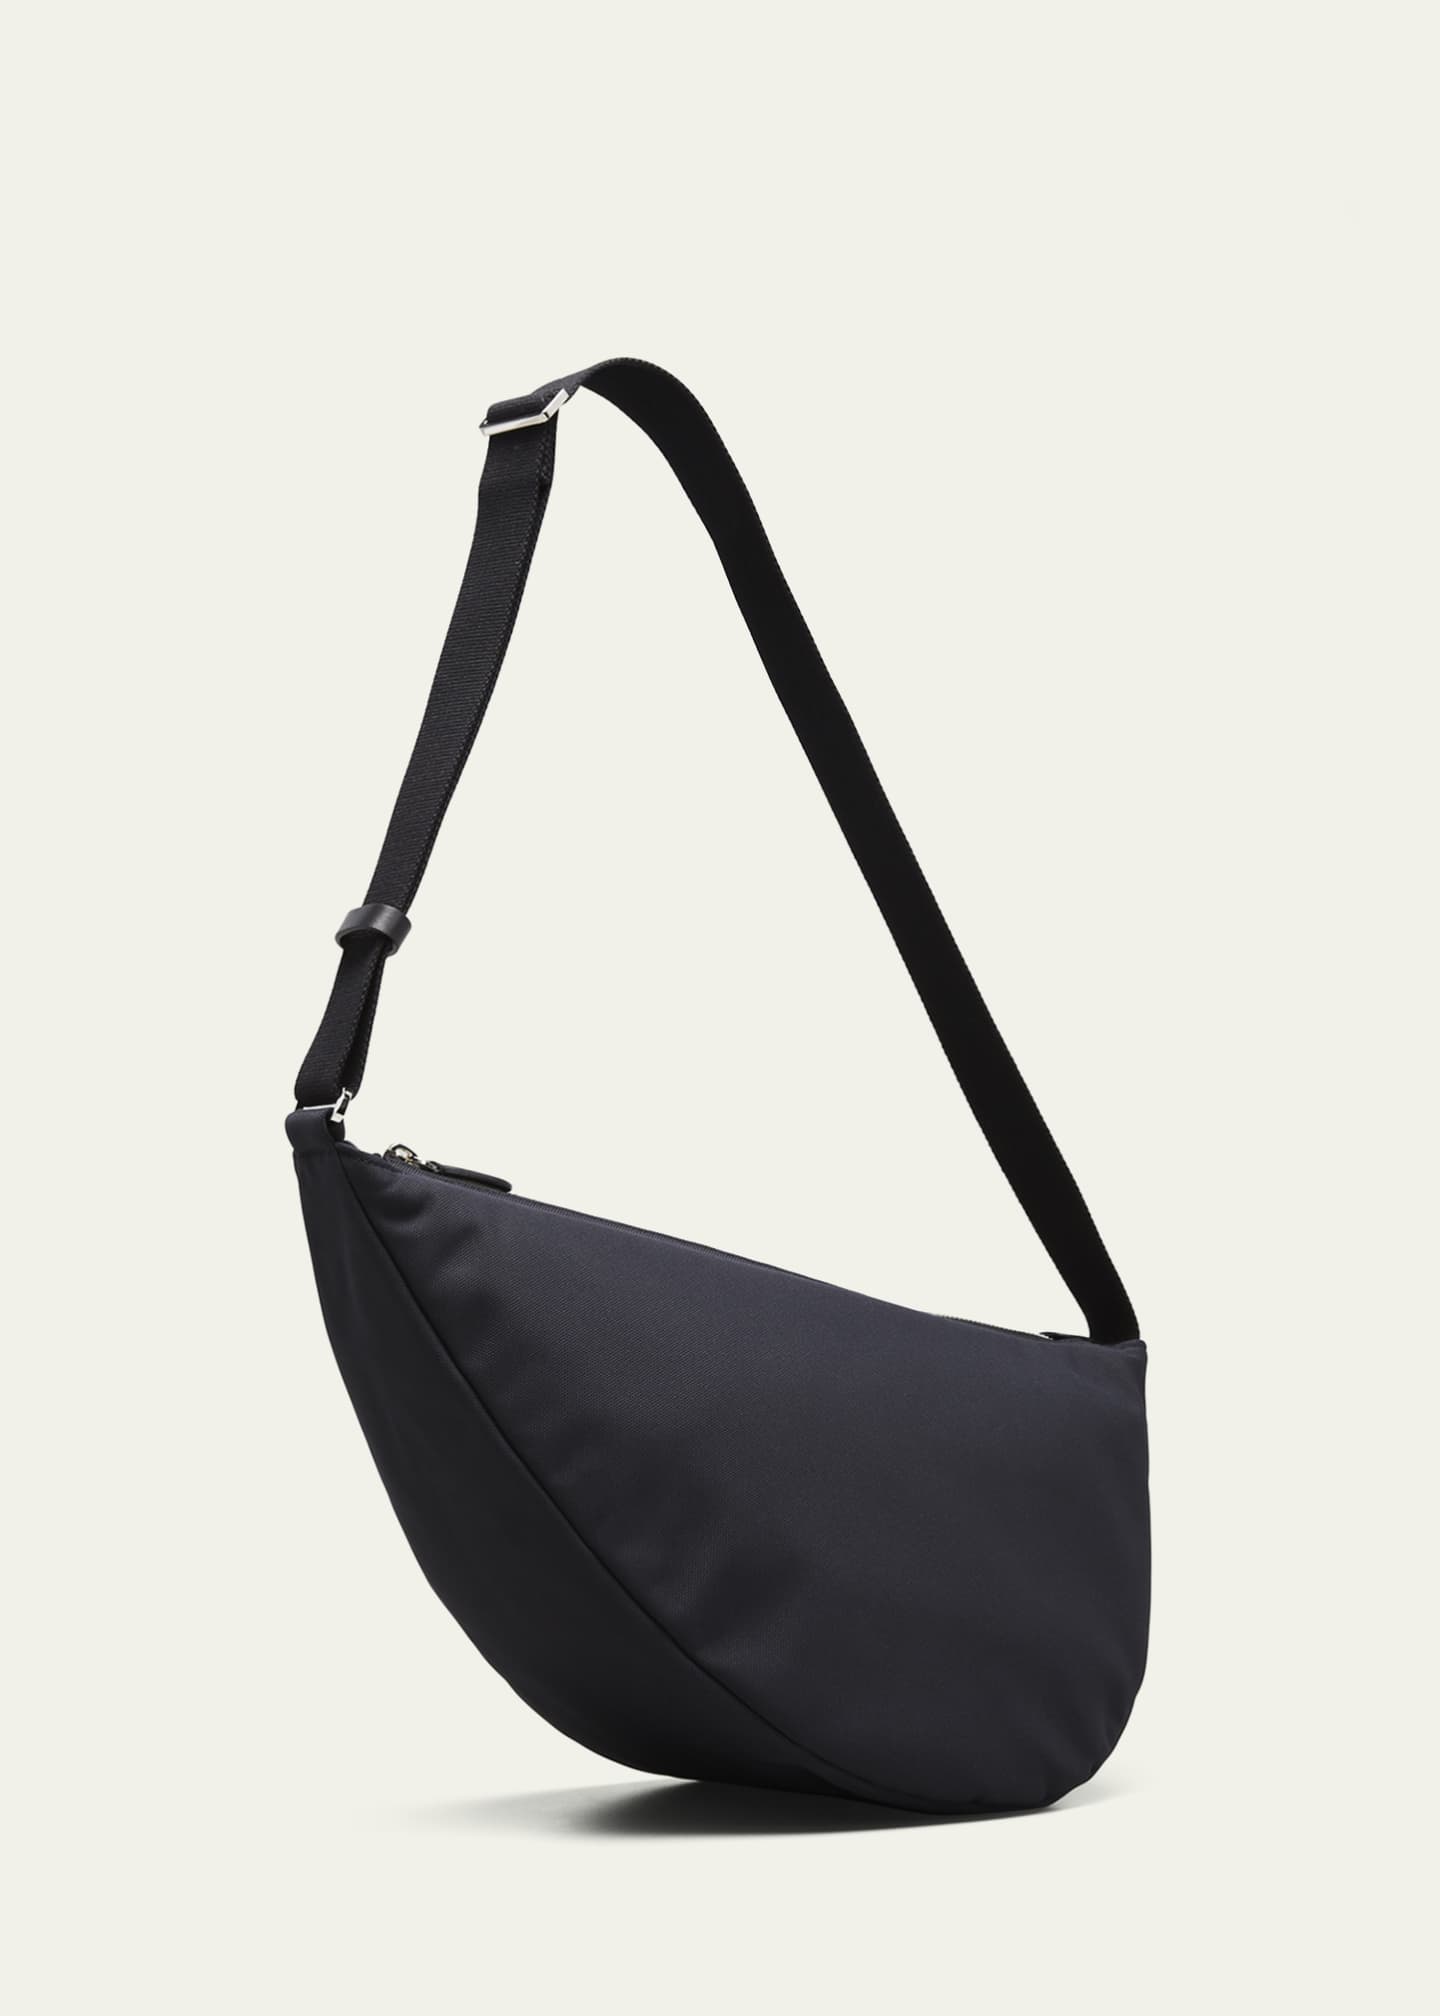 THE ROW Large Slouchy Banana Bag in Luxe Grain Leather - Bergdorf Goodman